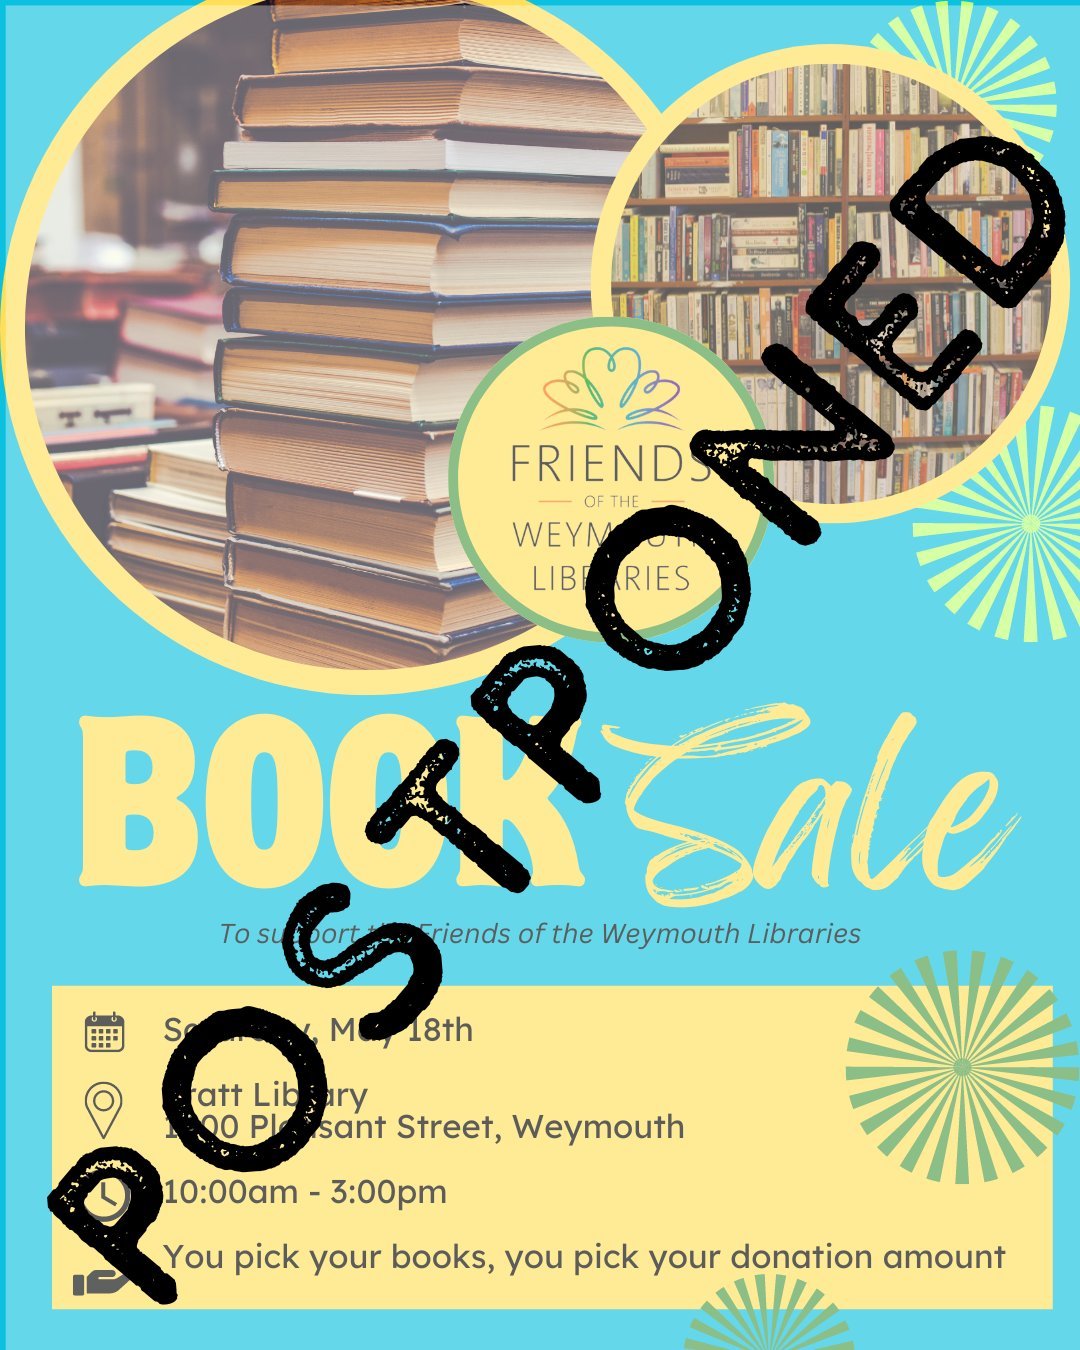 The Book Sale at Pratt Library has been postponed - we'll update you with the new date soon!